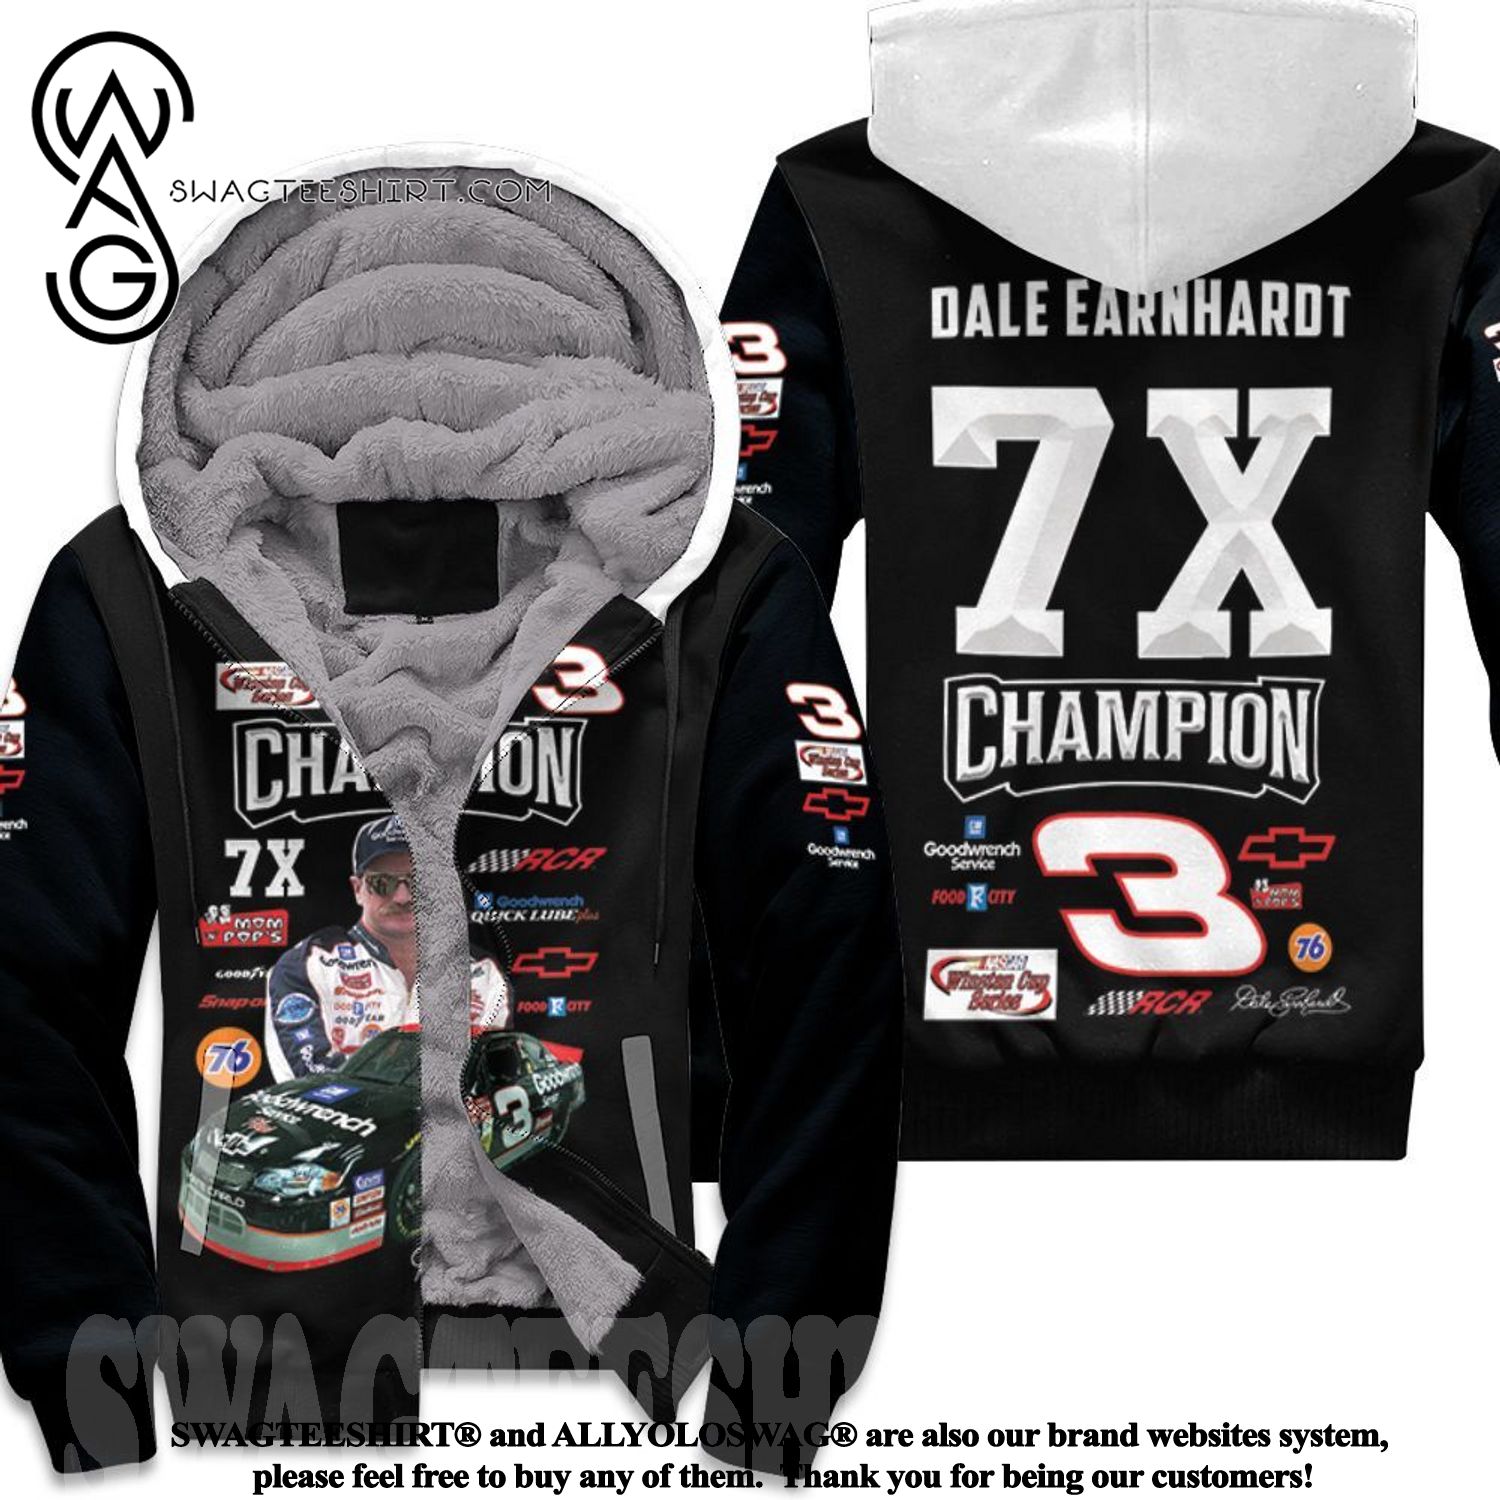 Dale Earnhardt Champion 7x Chevrolet Racing Car Signed Hot Version All Over Printed Fleece Hoodie